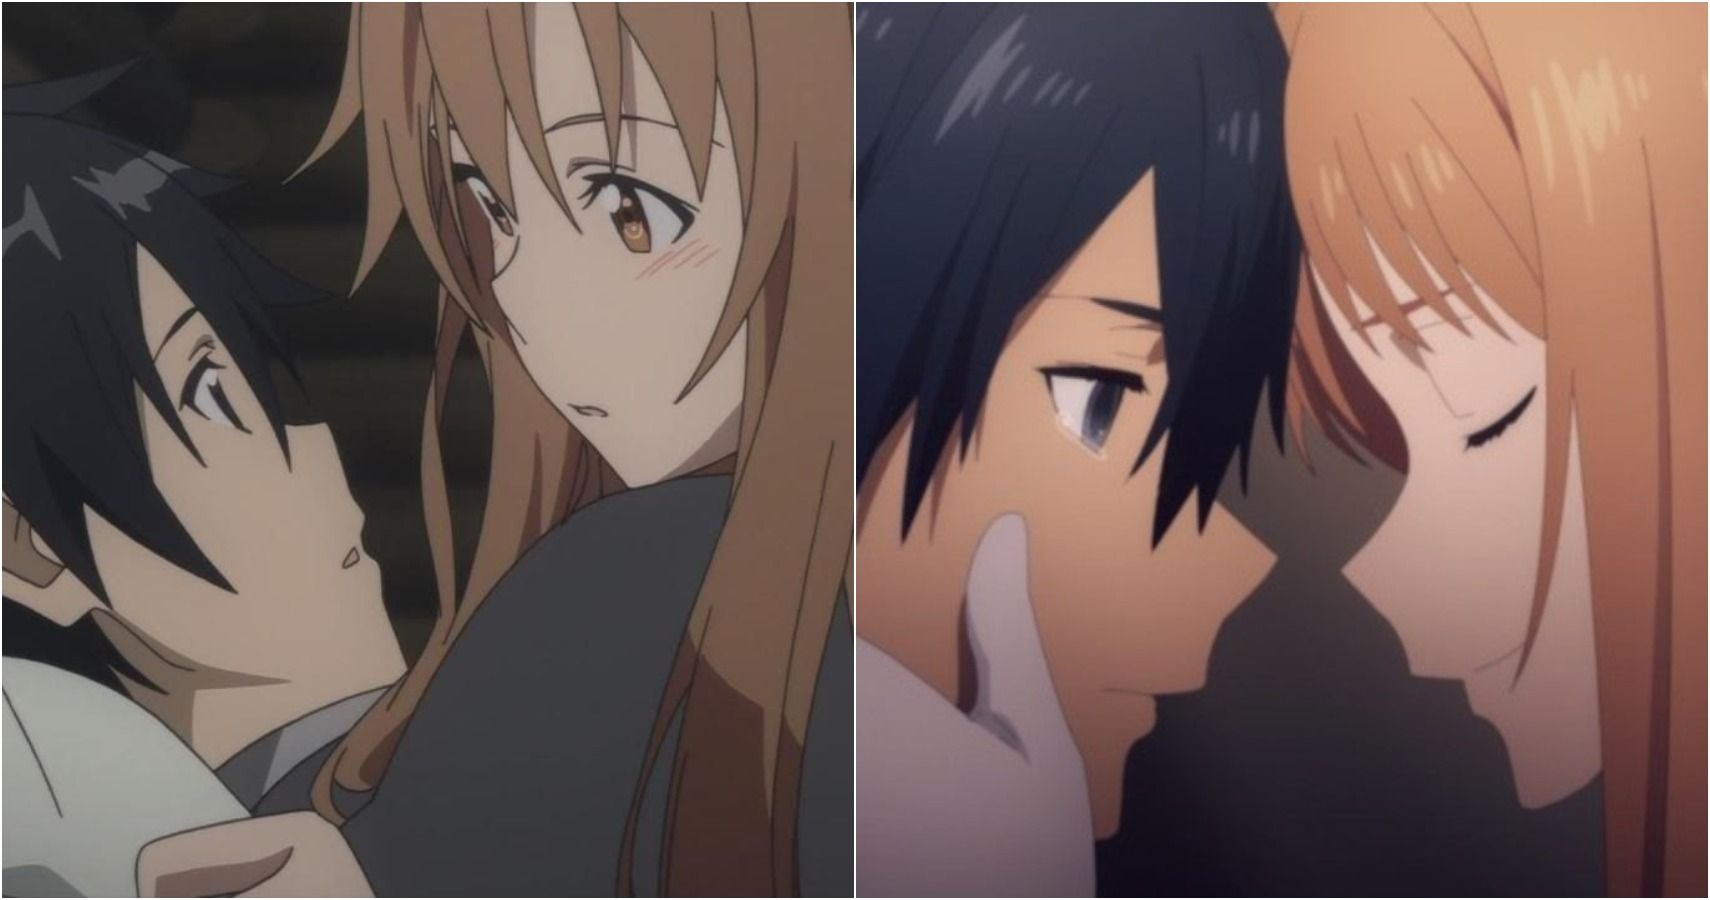 7. "Kirito and Asuna from Sword Art Online" - wide 7